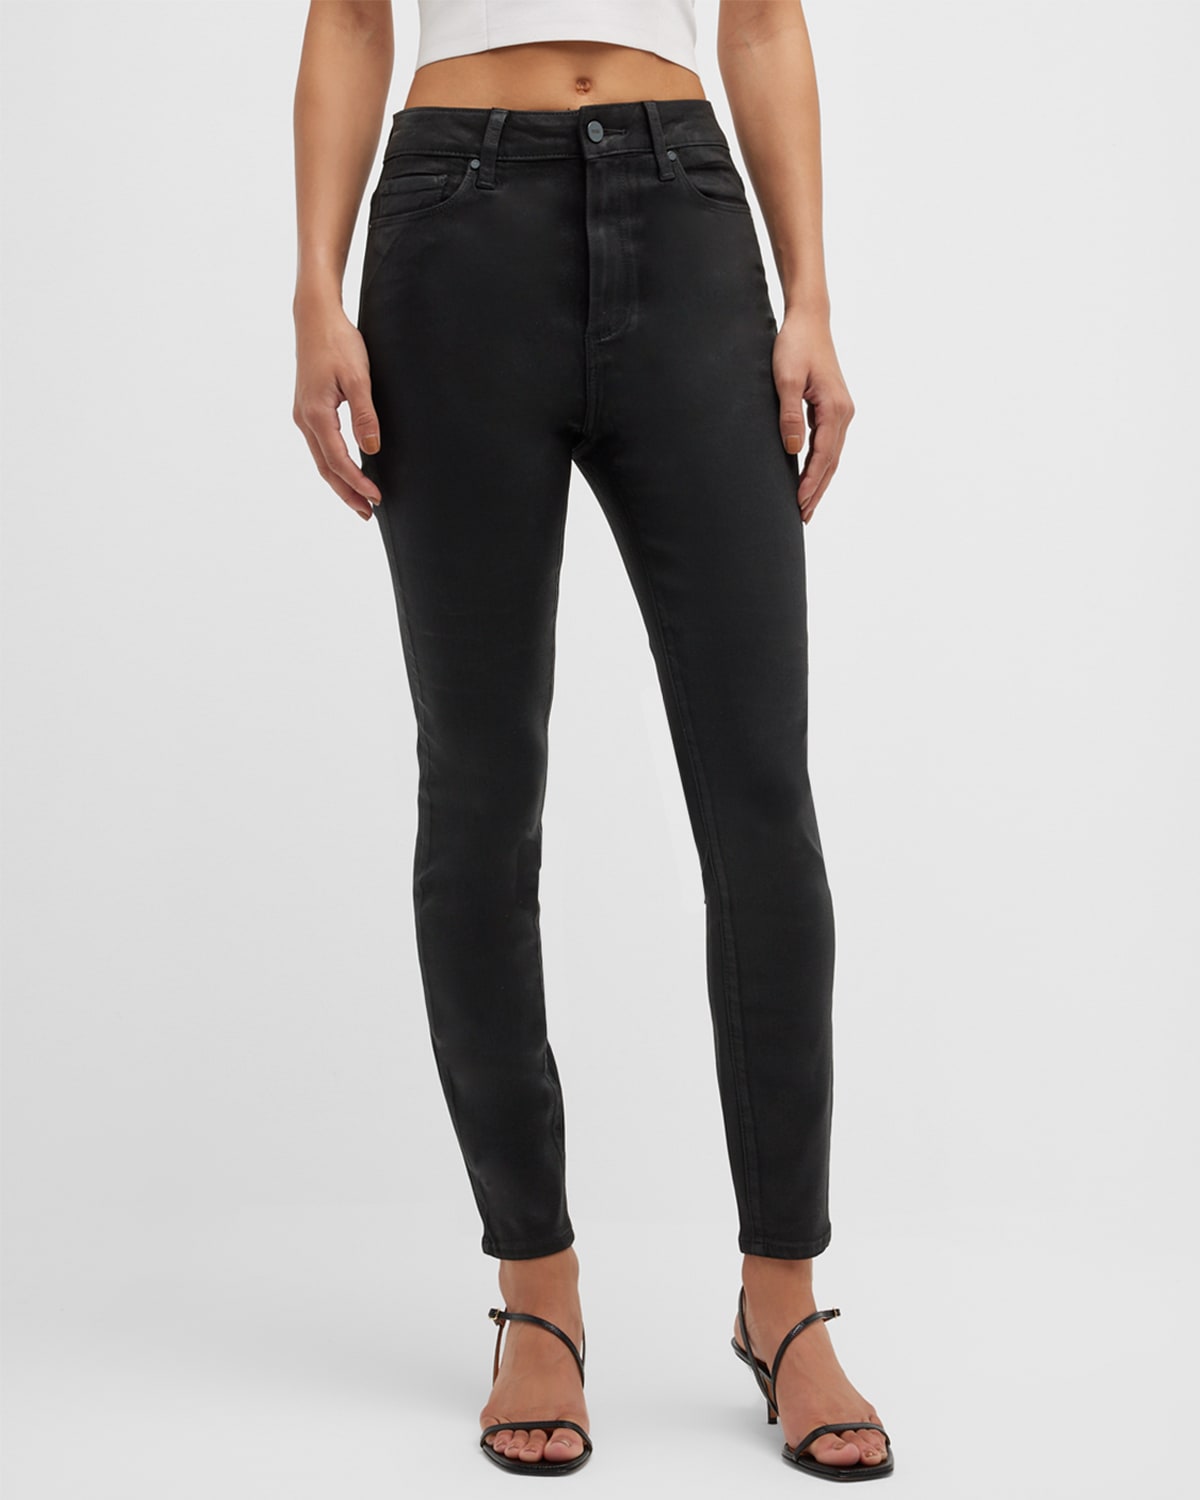 L'Agence Margot Coated High-Rise Skinny Ankle Jeans | Neiman Marcus